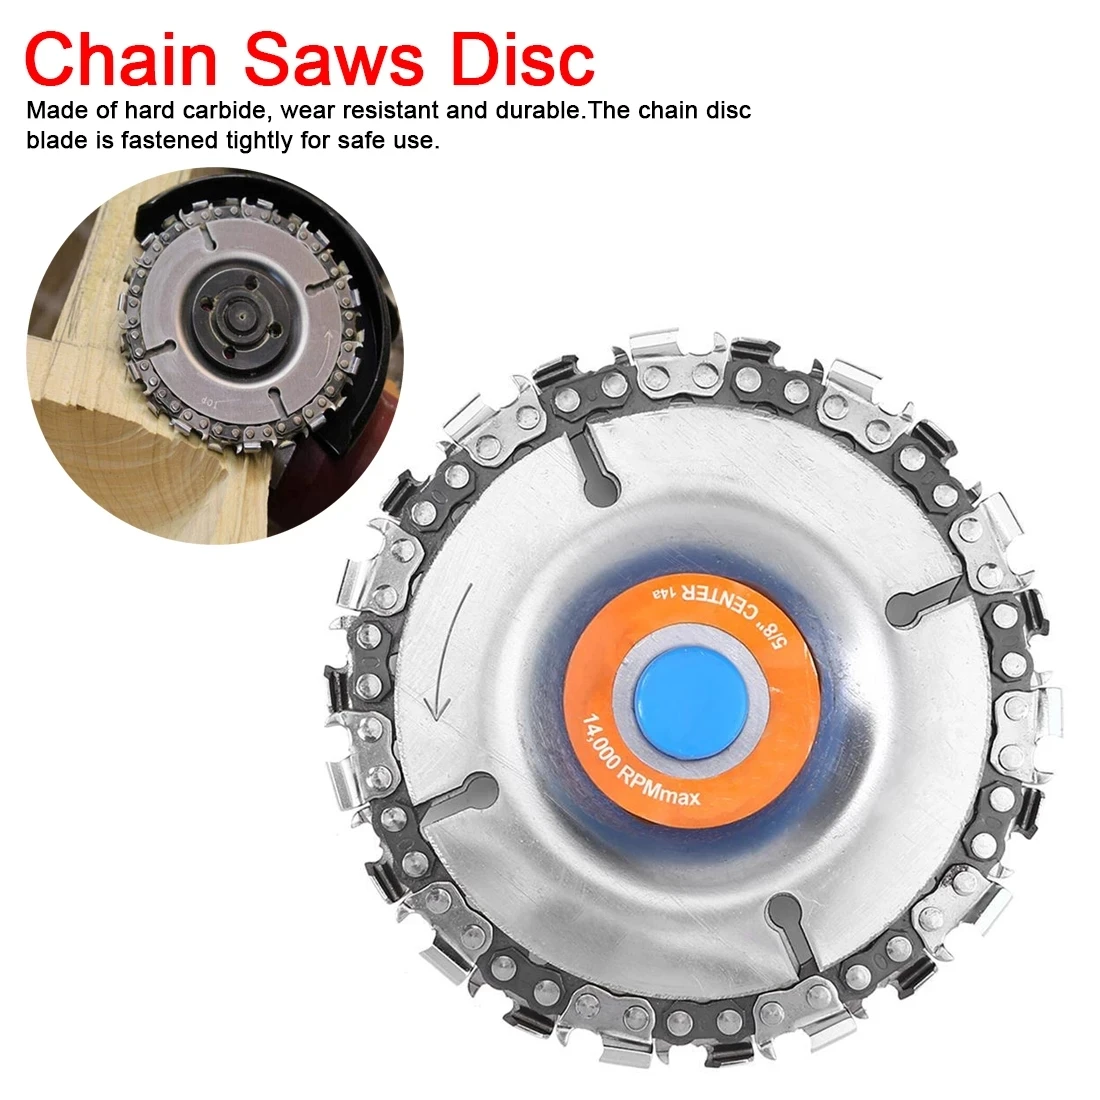 4 Inch Angle Grinder Disc Chain Saw 22 Tooth for Wood Carving Cutting Tool 